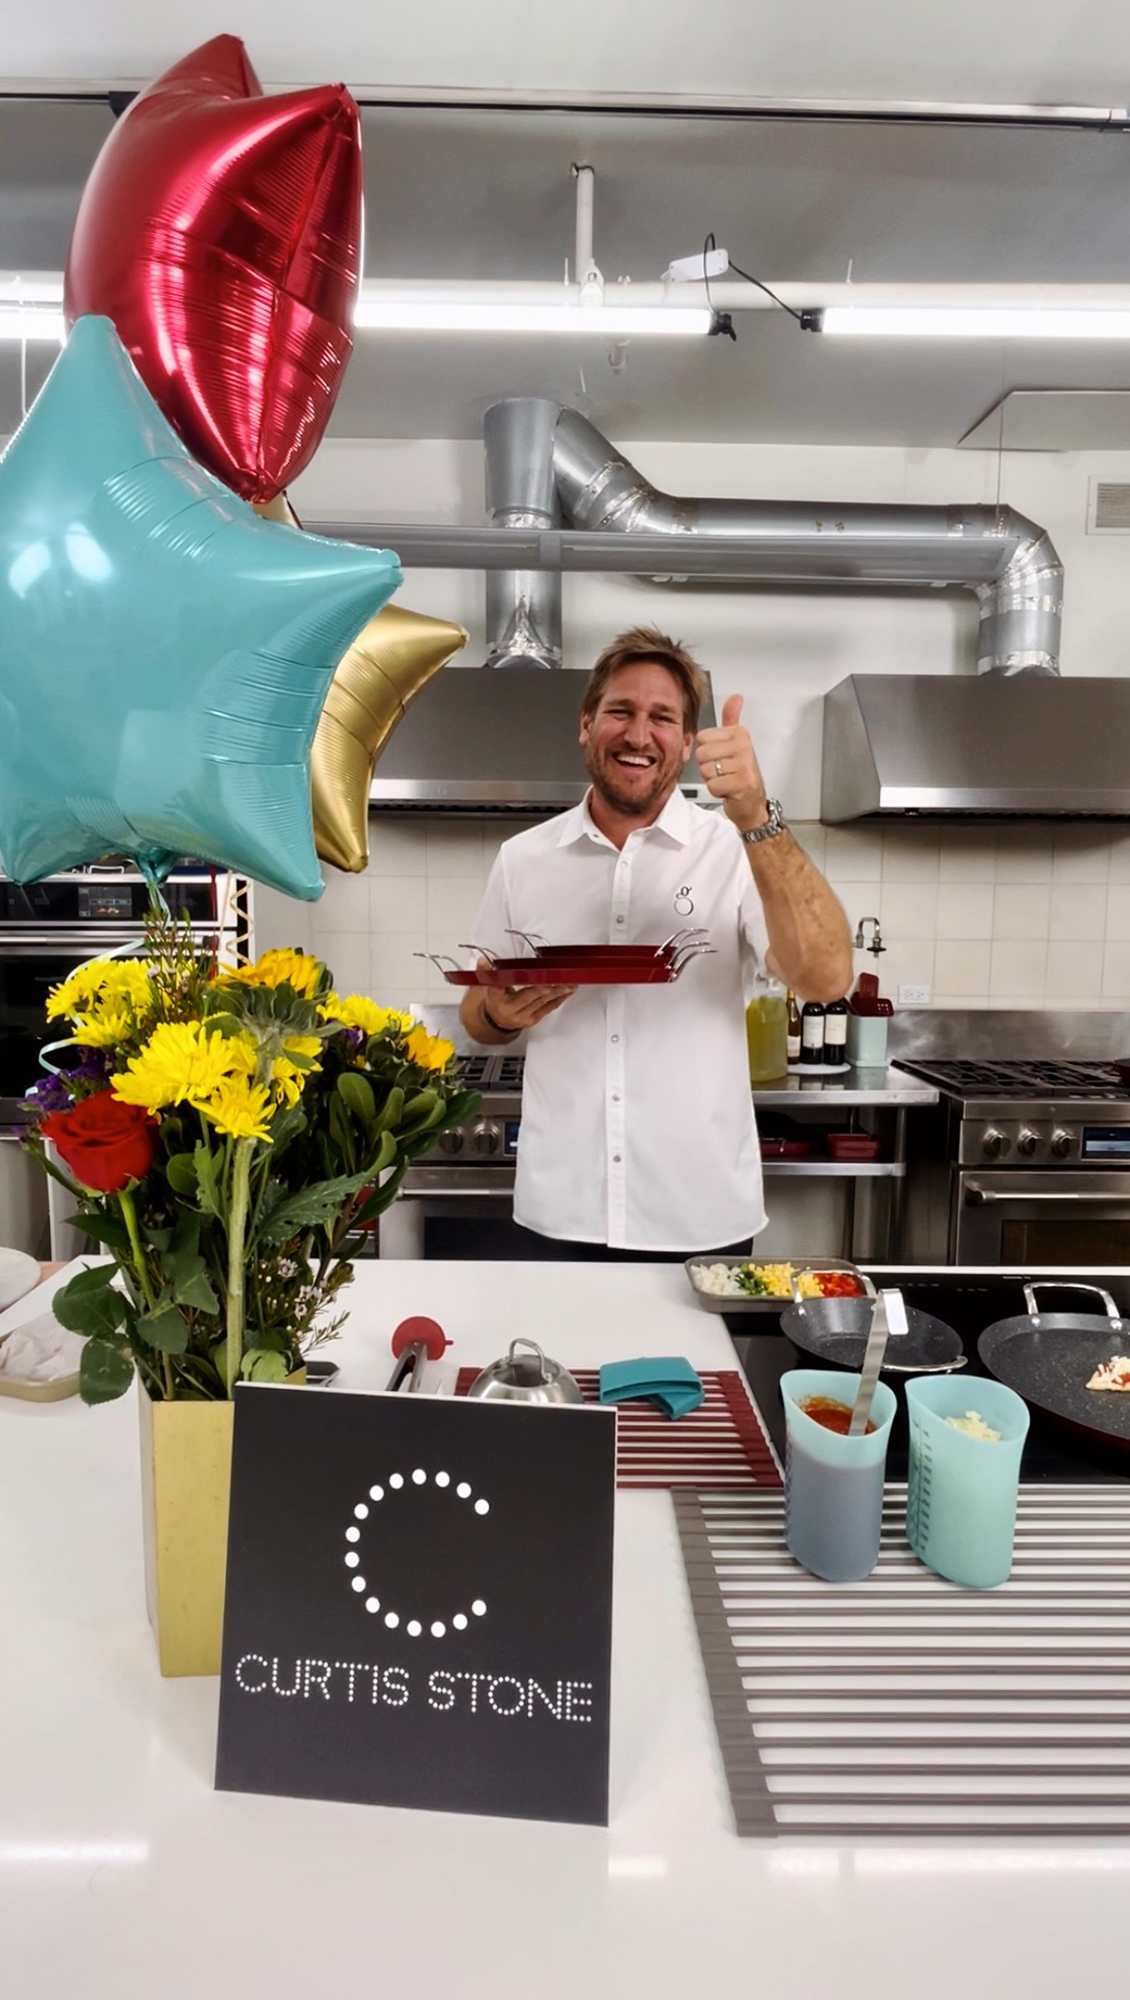 https://www.usmagazine.com/wp-content/uploads/2022/04/Curtis-Stone-Inside-a-Day-in-My-Life-3-PM.jpg?quality=55&strip=all